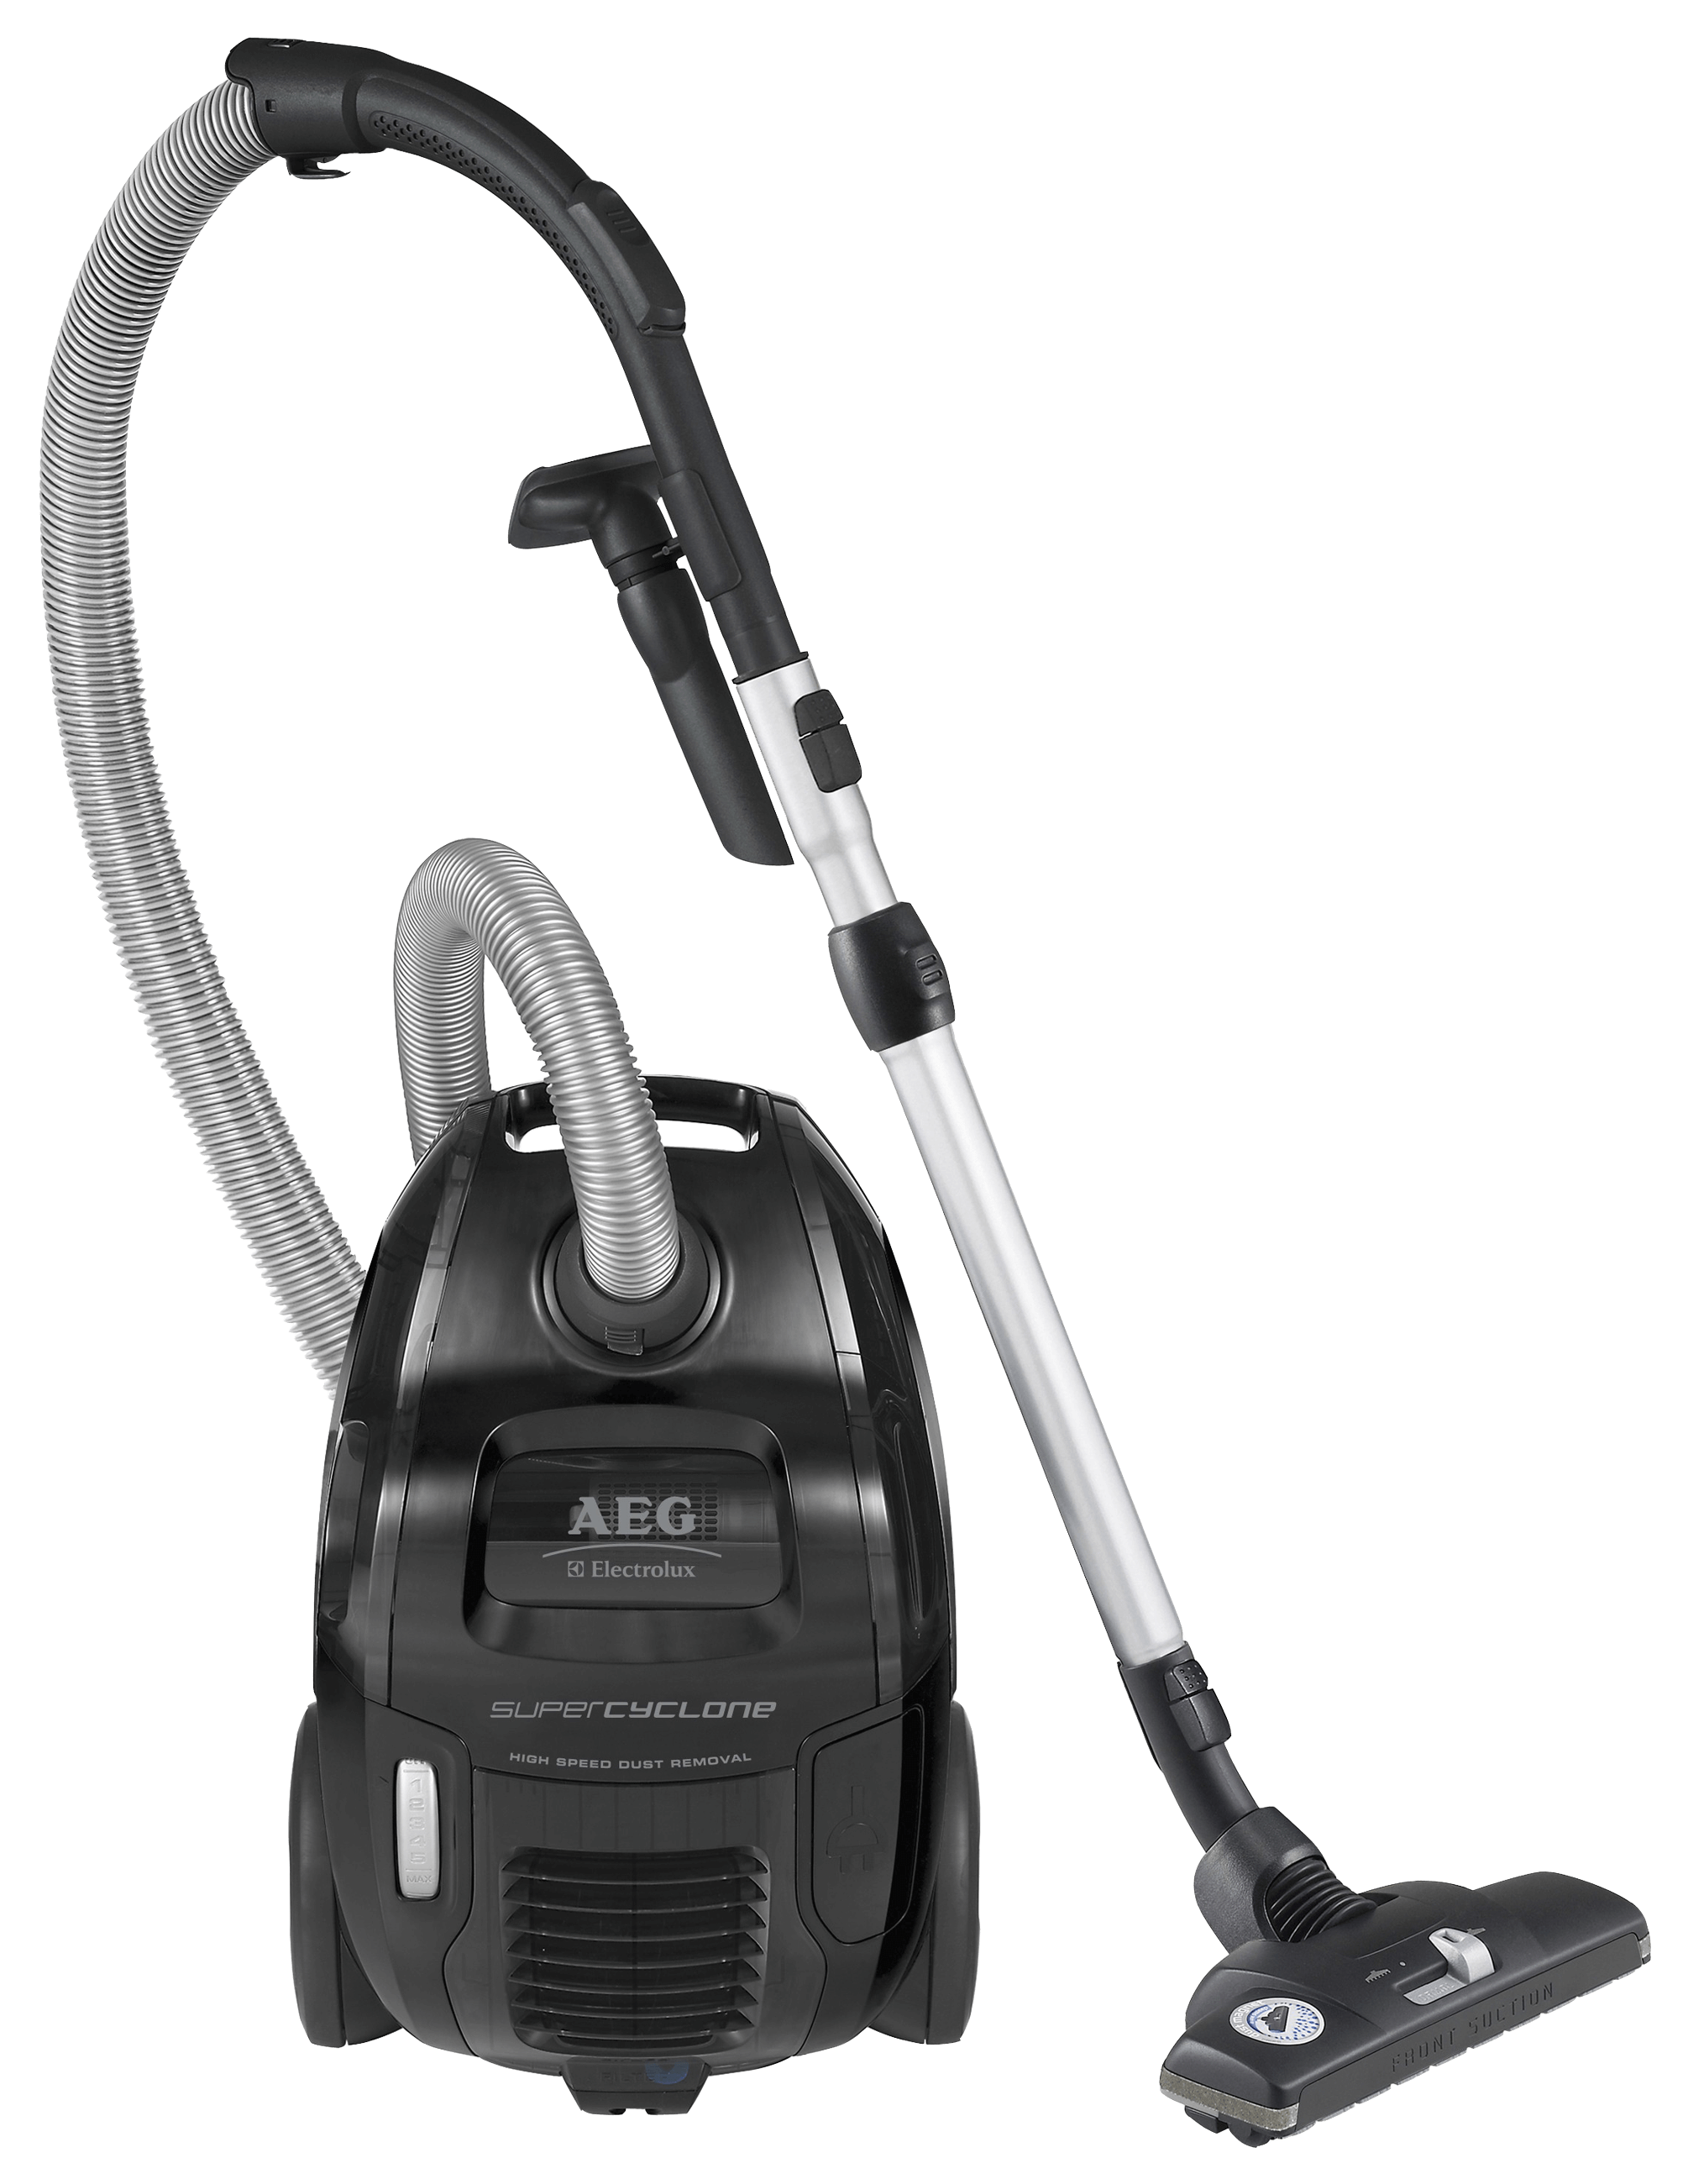 Vacuum Cleaner PNG Background Clip Art